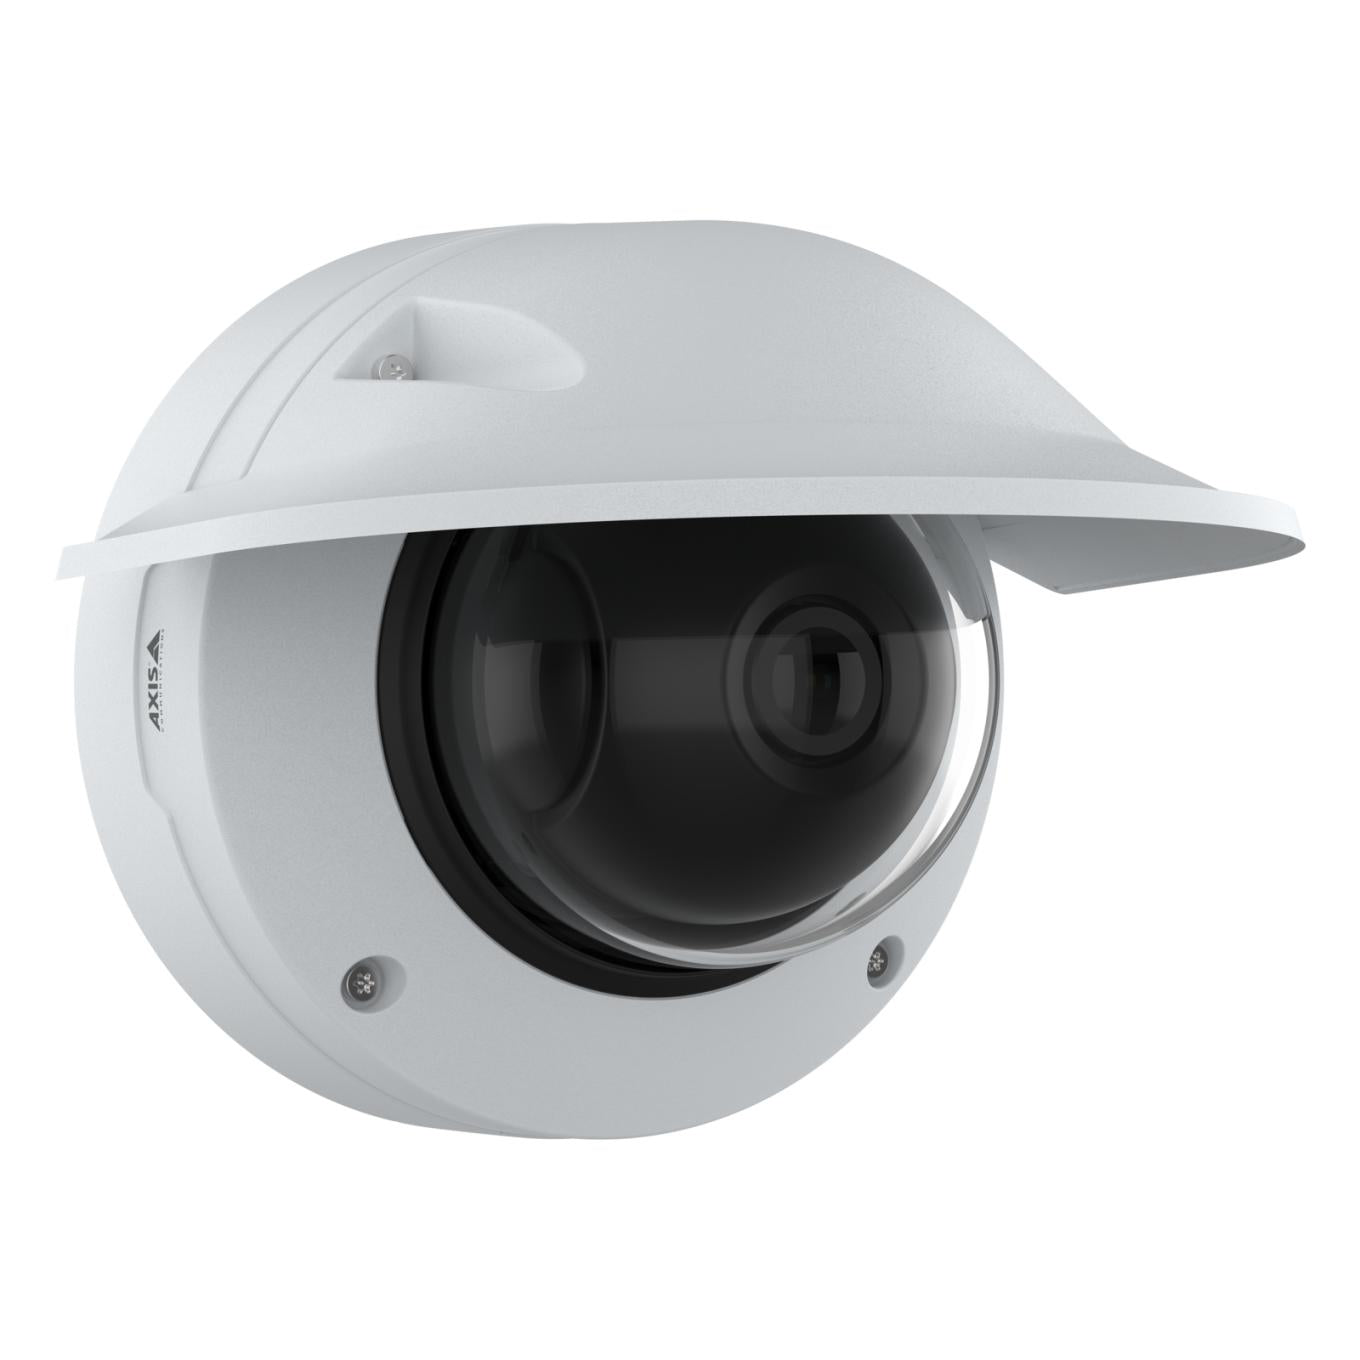 Axis AXIS Q3626-VE (02616-004) Dome Camera Advanced 4 MP dome with remote adjustment